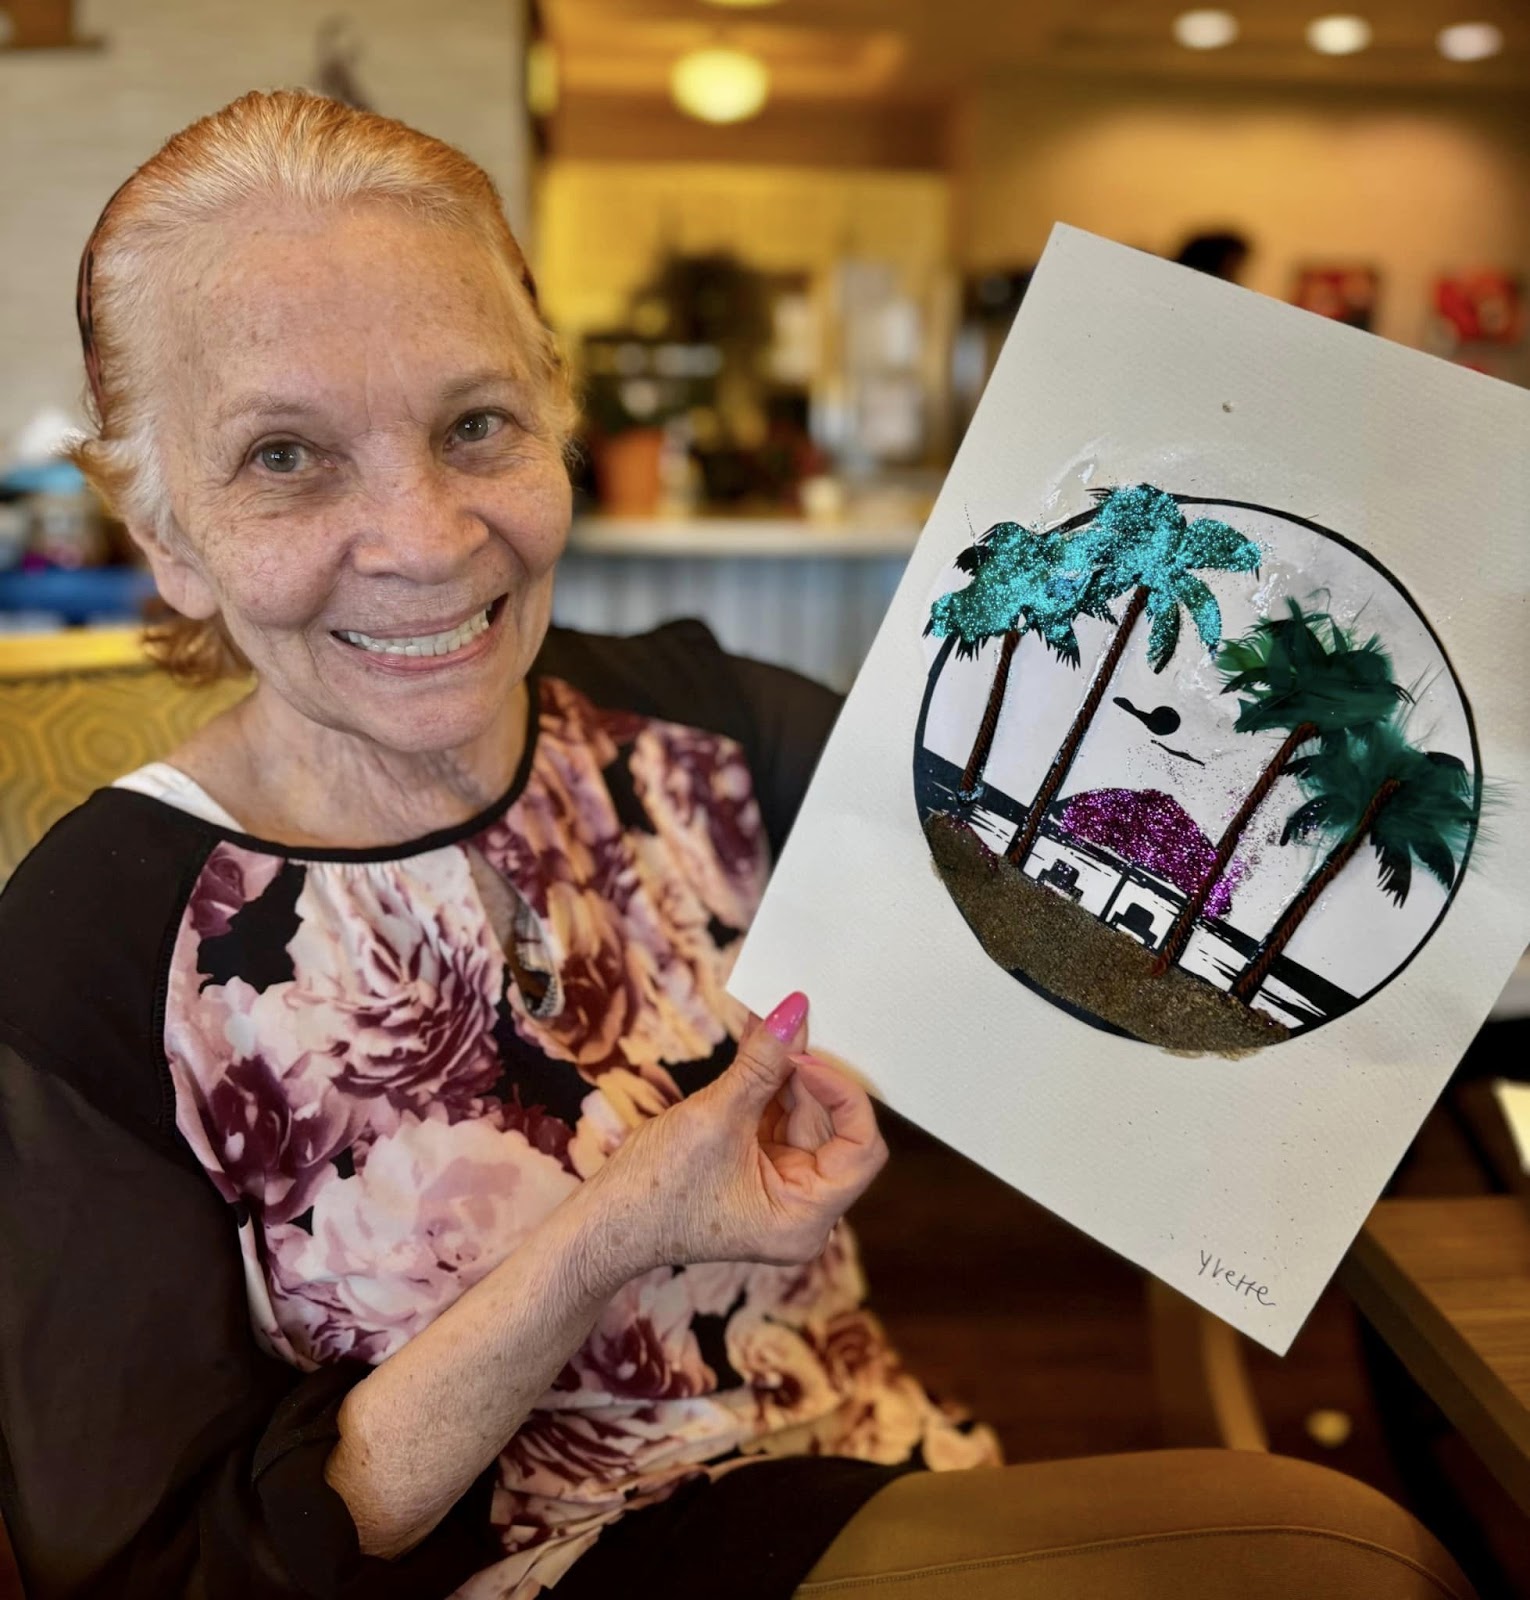 A woman smiling and showcasing a piece of art she created in an memory care/assisted living facility